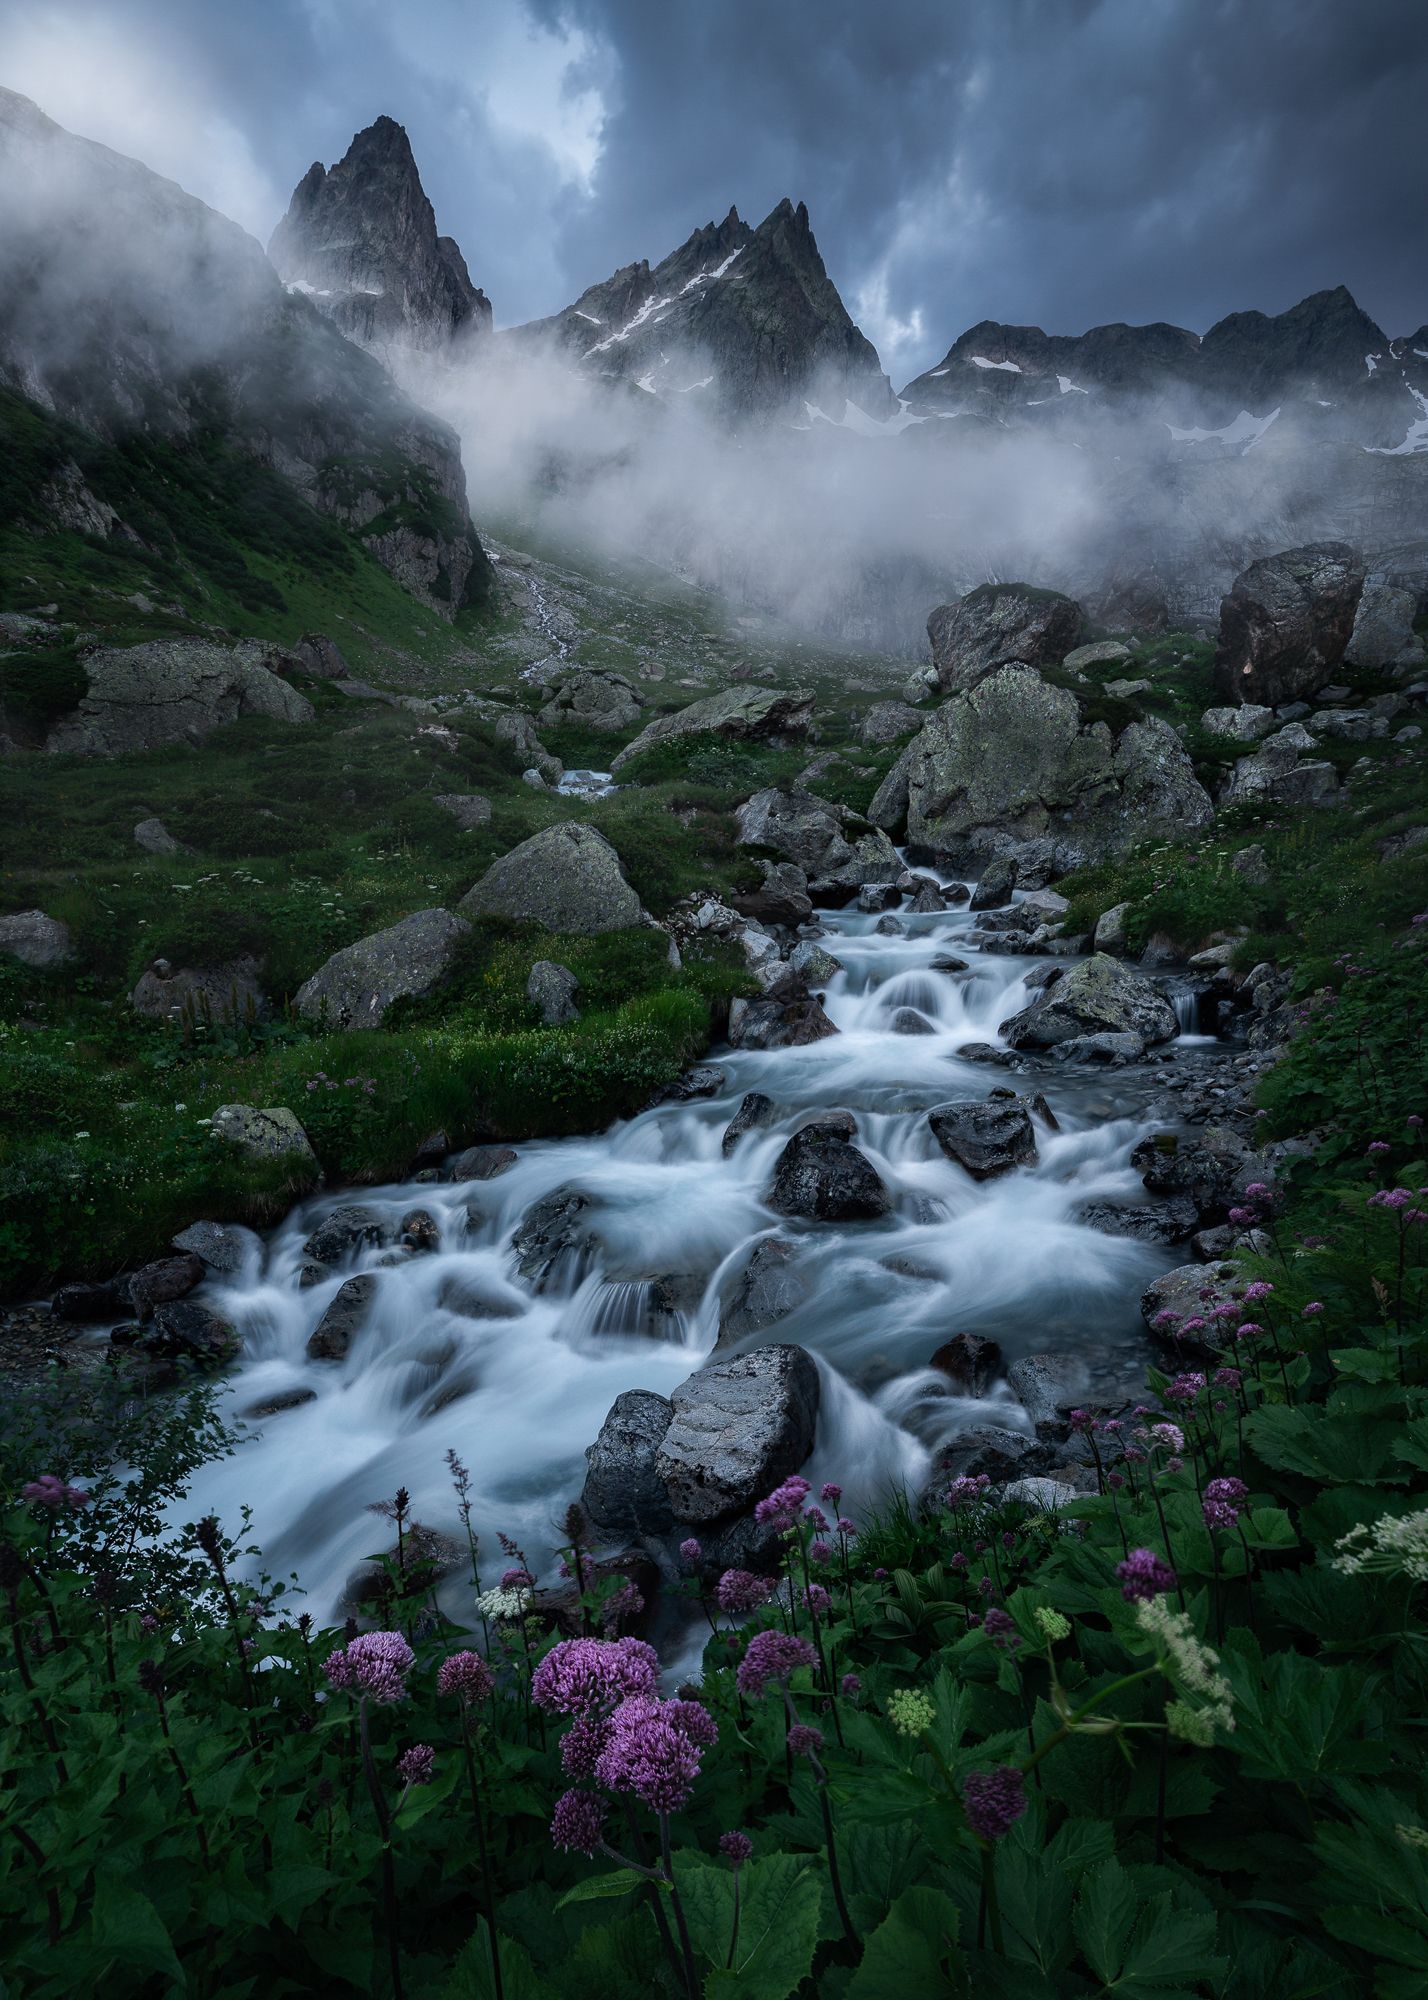 Landscape mountain moody blue hour waterfall river flowers spring, Stefano Balma